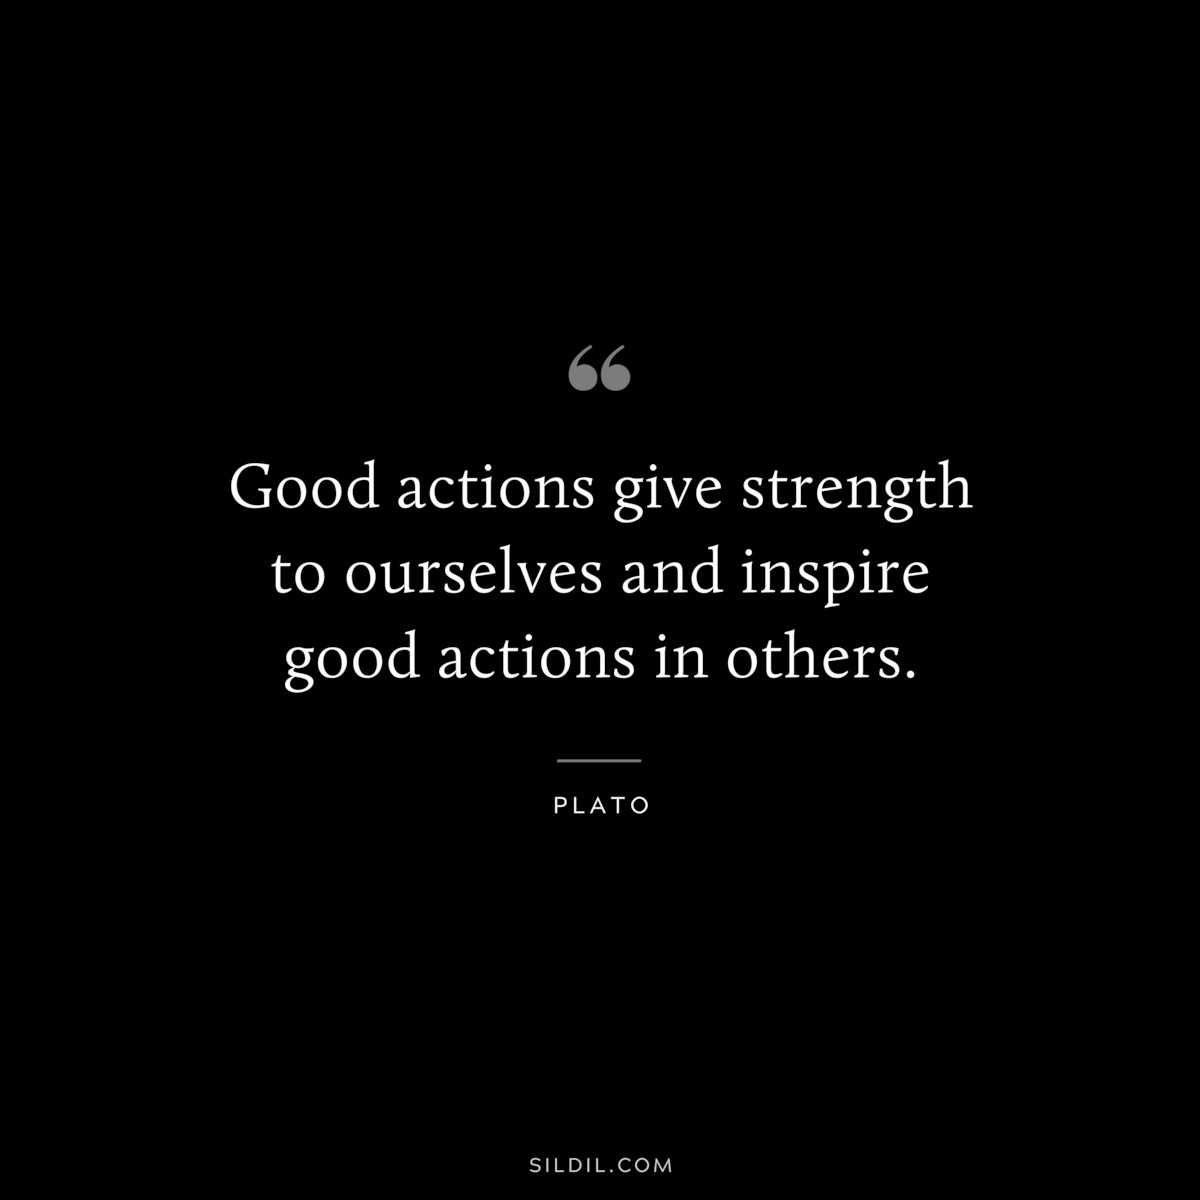 Good actions give strength to ourselves and inspire good actions in others. ― Plato